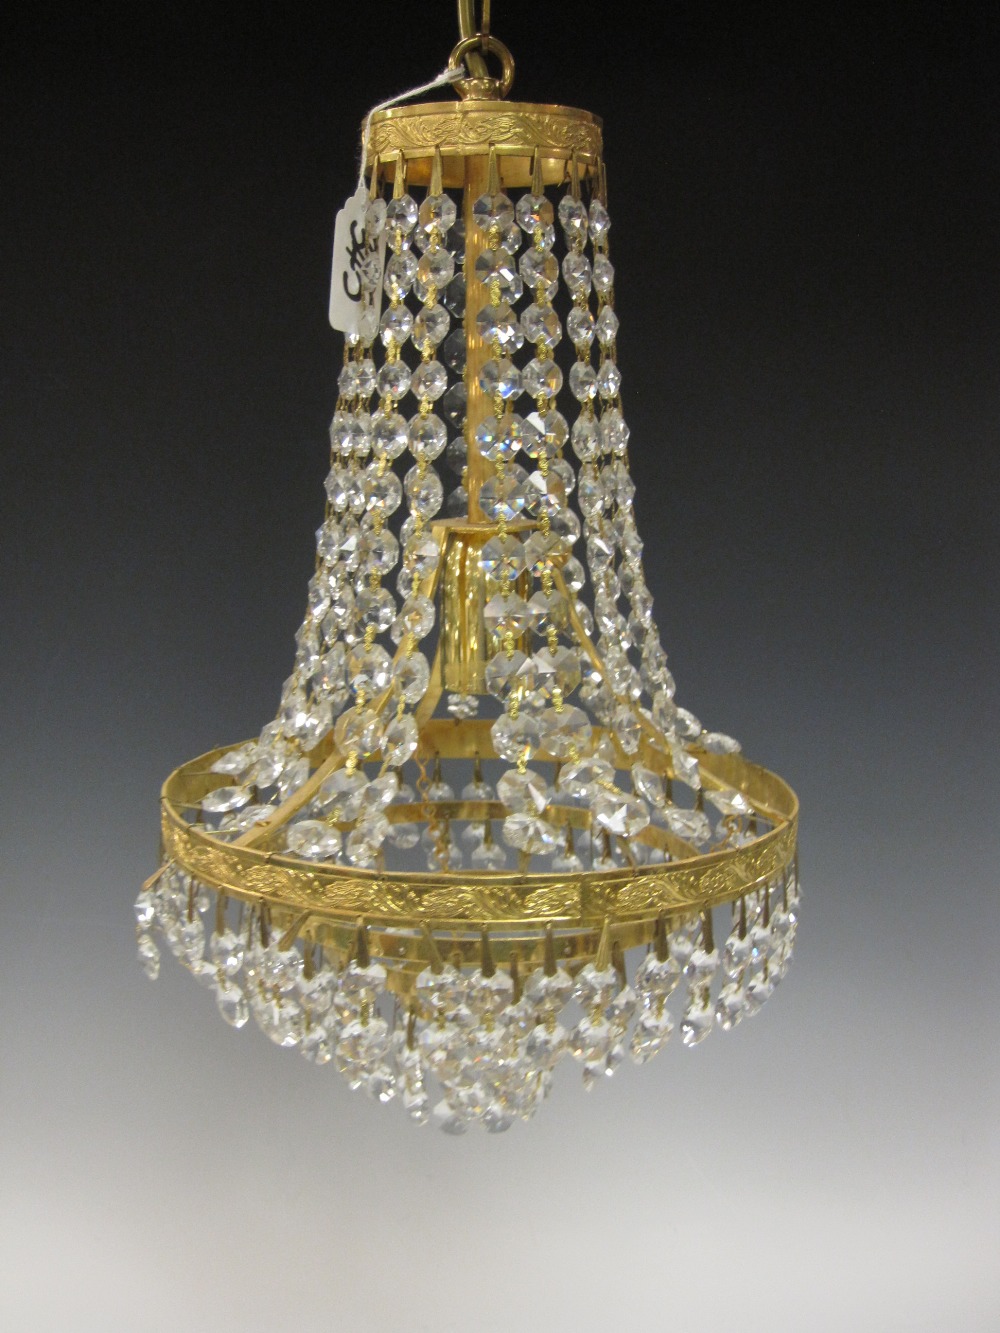 A cut-glass Chandelier with rows of pendant drops on ormolu effect mounts